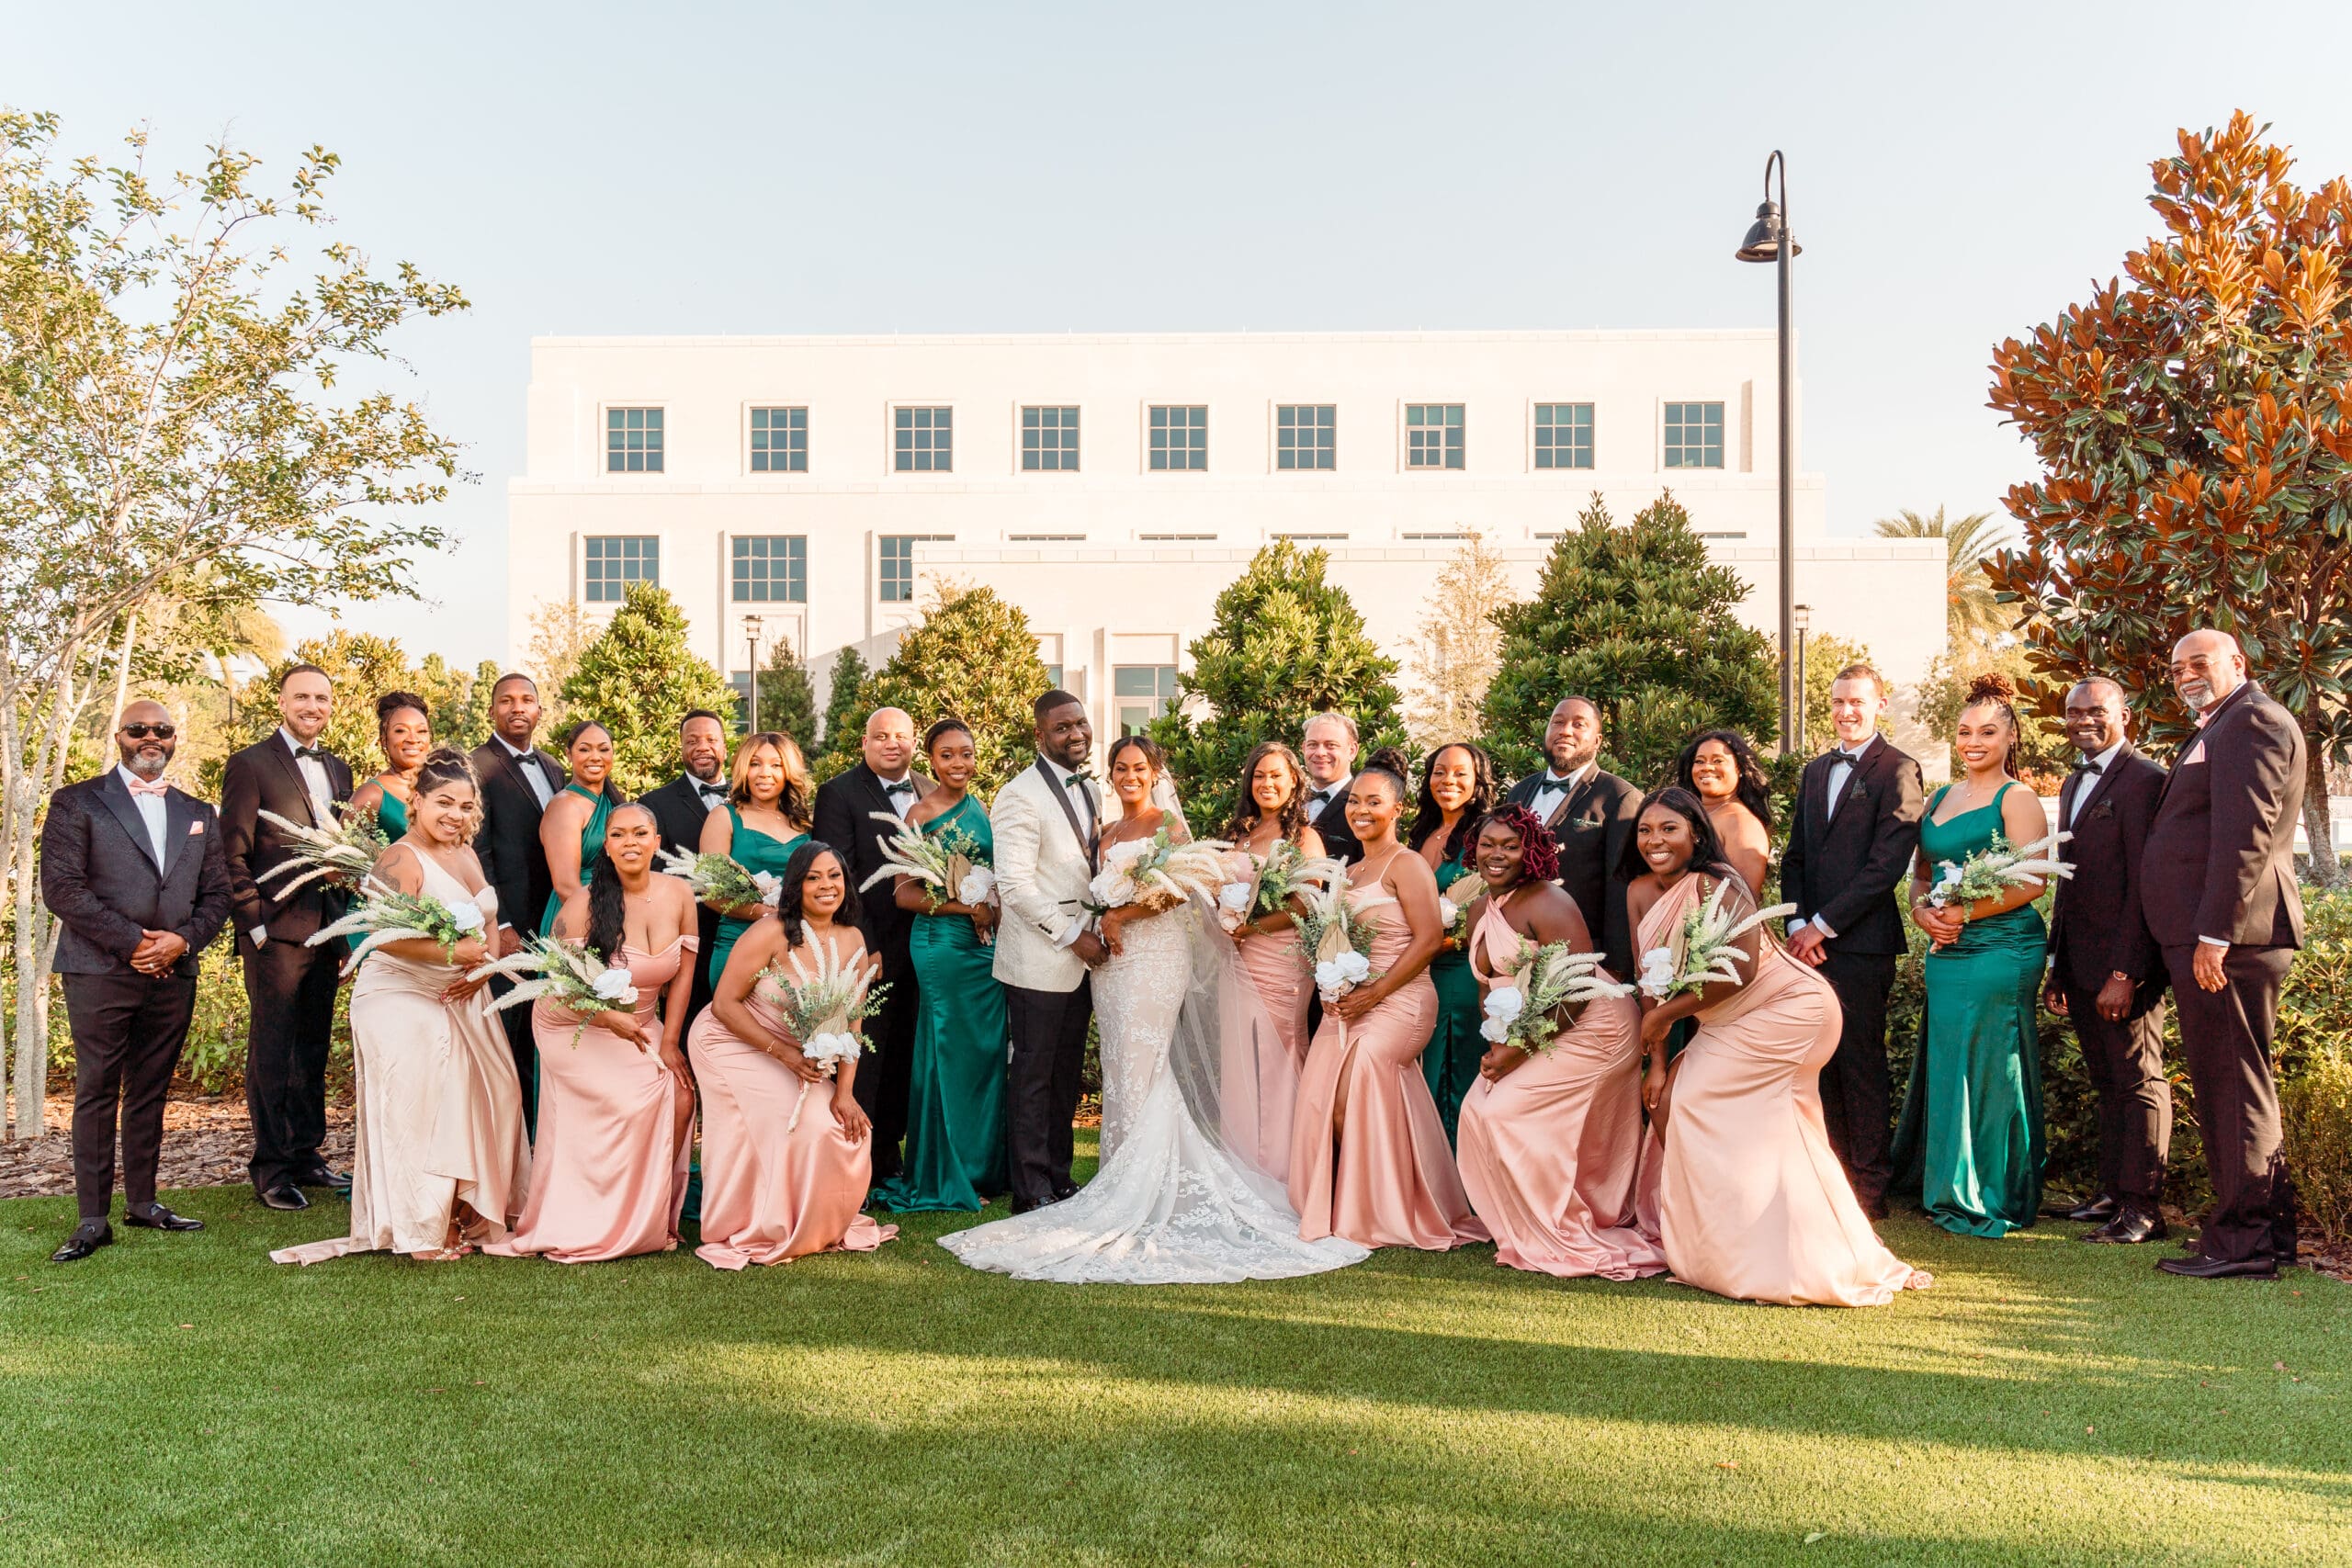 Lateisha and Glen's large bridal party posing together in front of Ocoee Lakeshore Center.